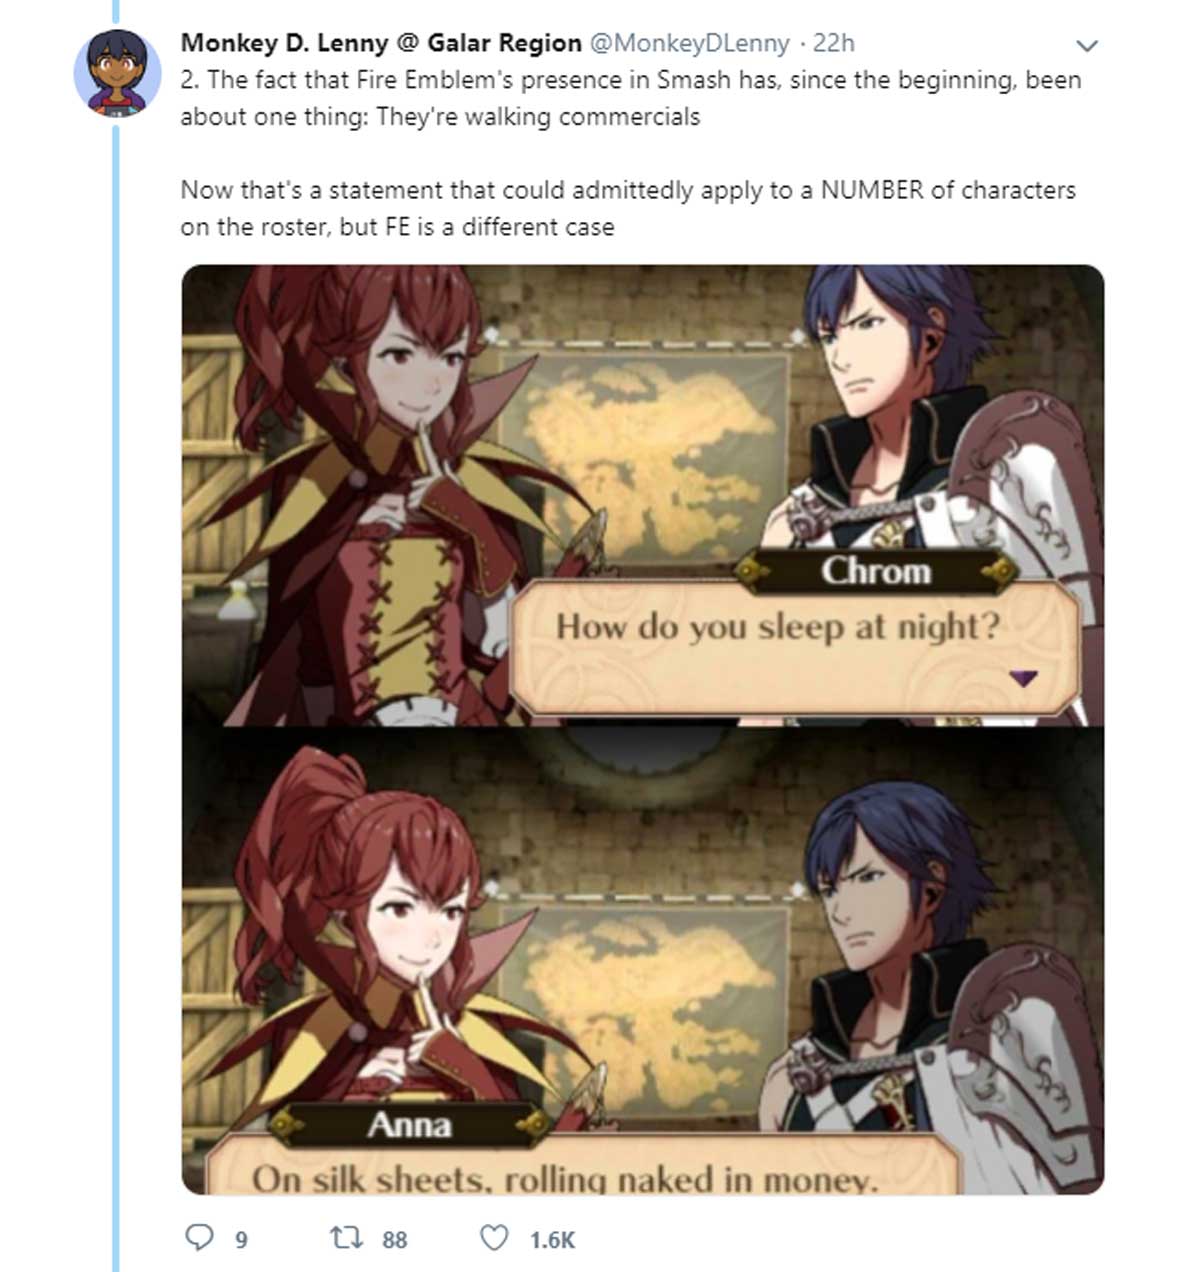 chrom how do you sleep at night - Monkey D. Lenny @ Galar Region 22h 2. The fact that Fire Emblem's presence in Smash has, since the beginning, been about one thing They're walking commercials Now that's a statement that could admittedly apply to a Number